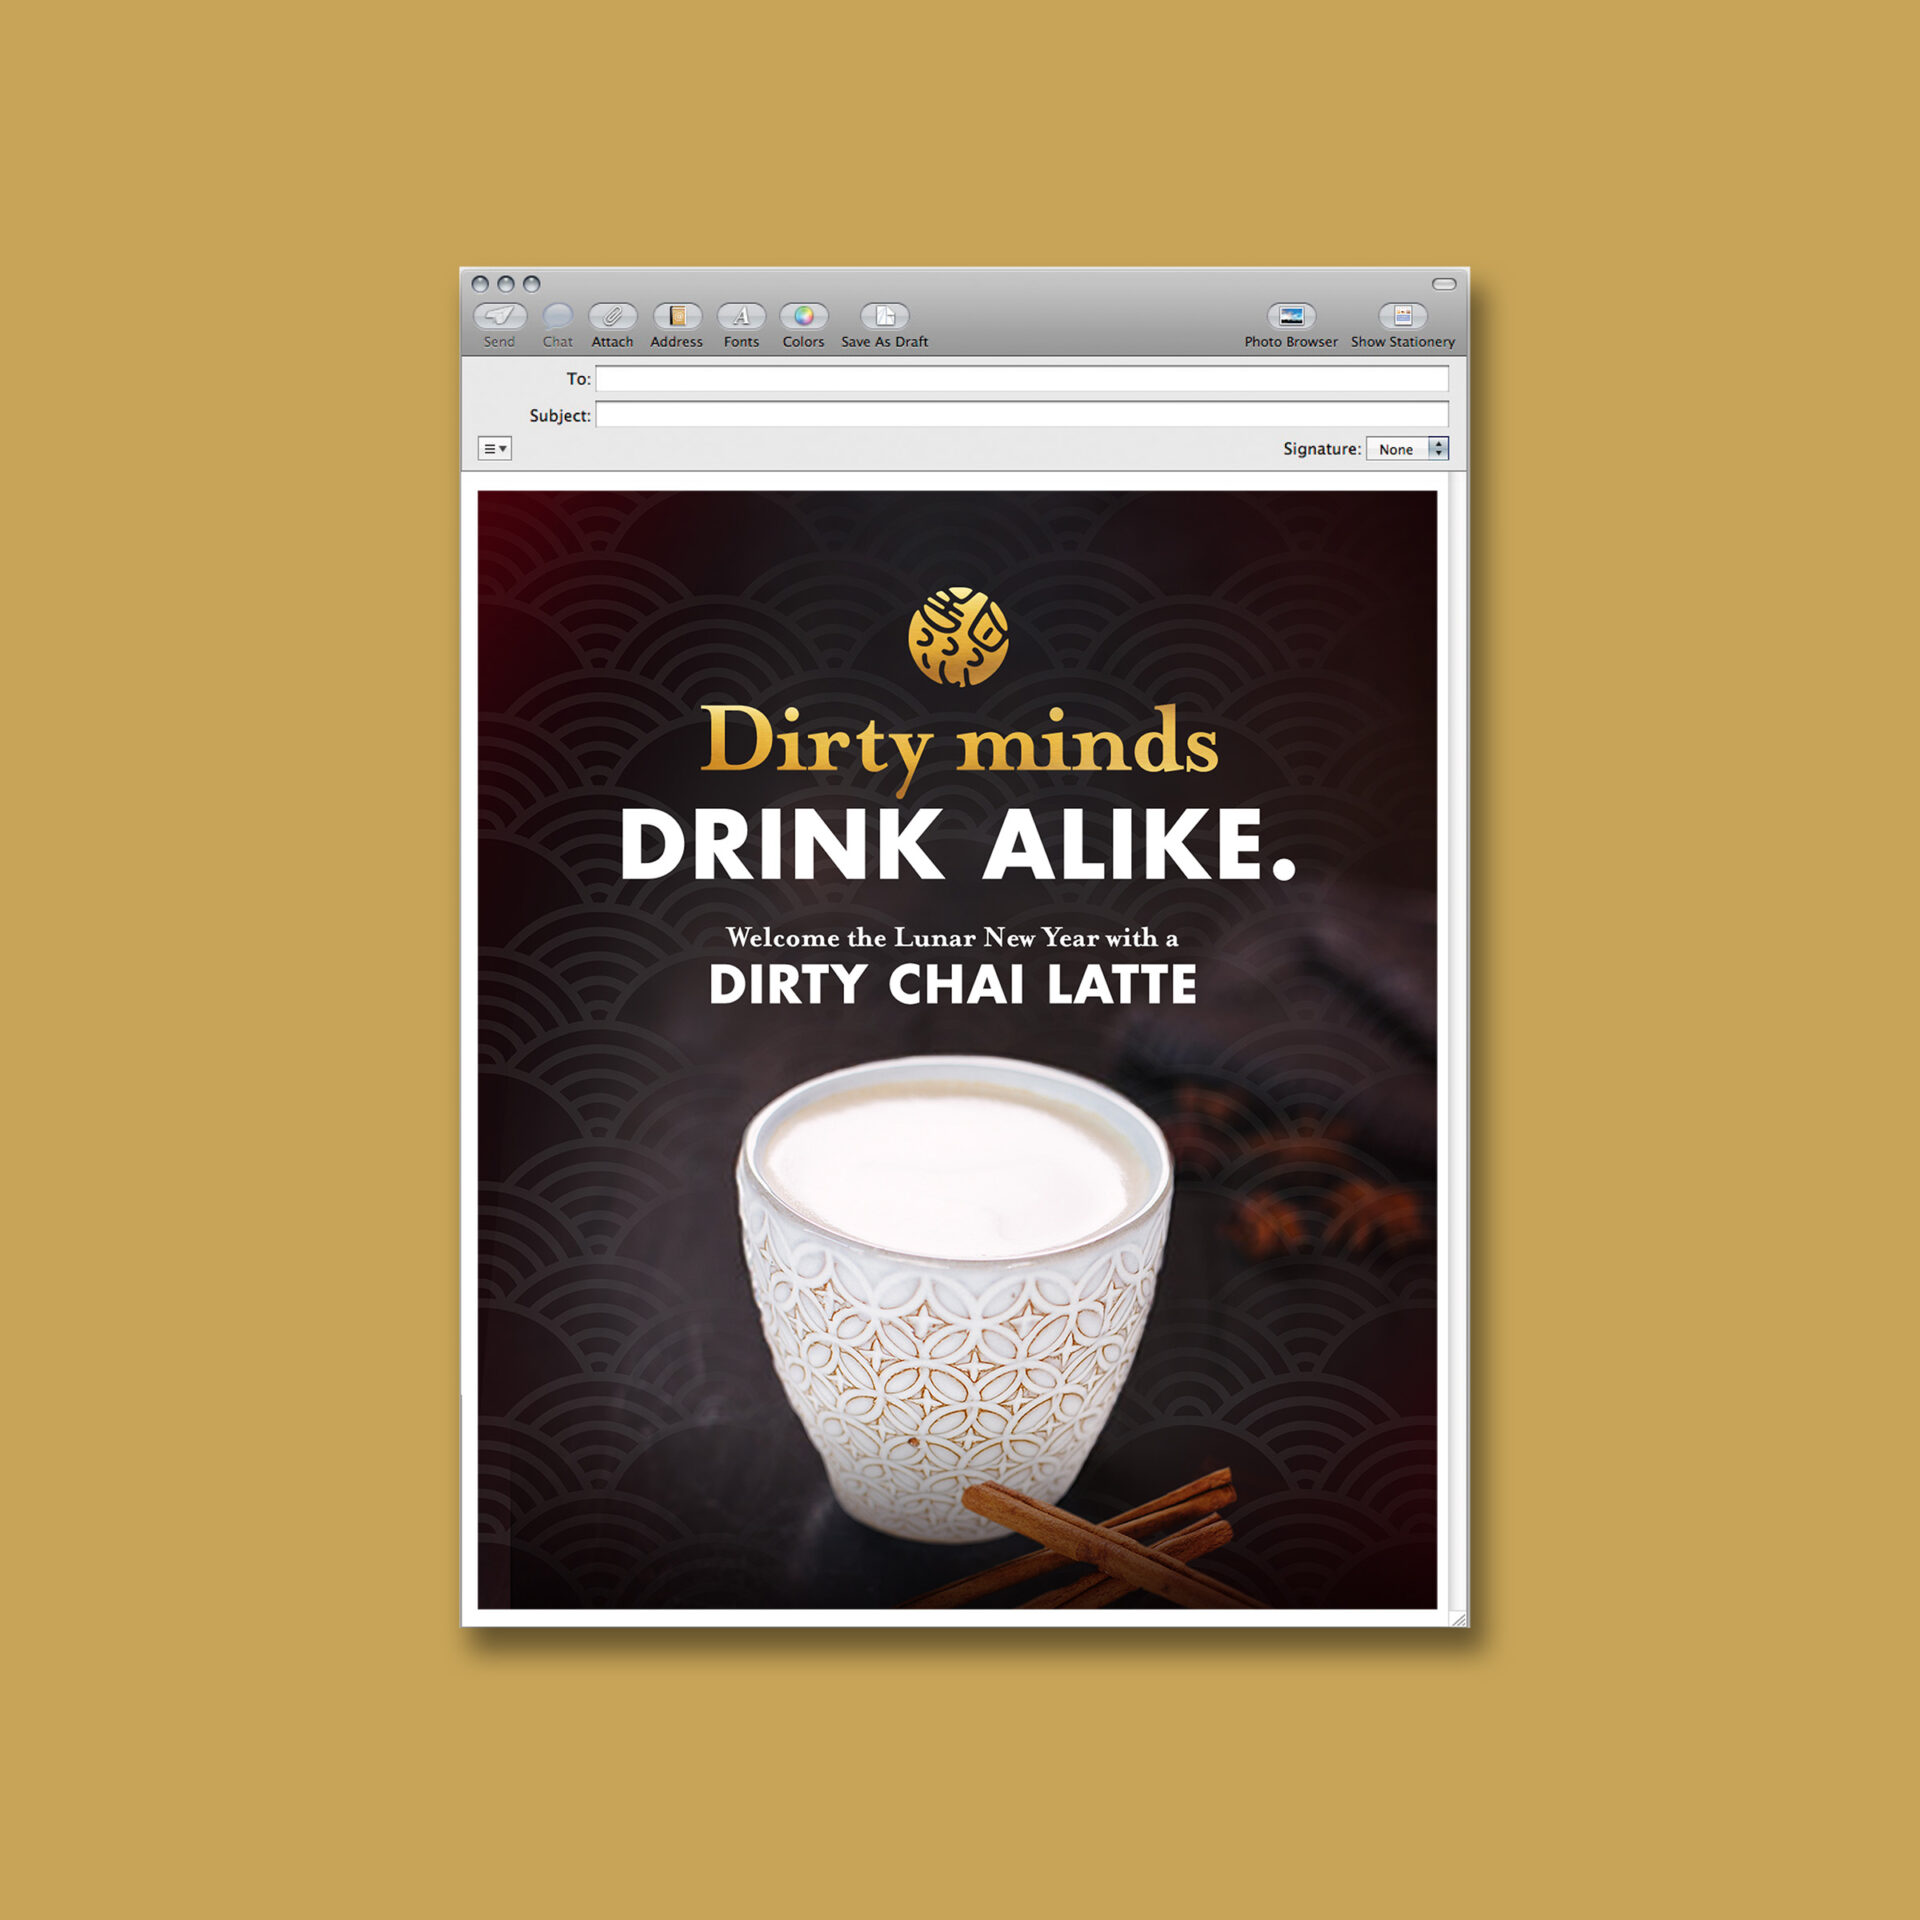 Email marketing promoting the Dirty Chai Latte with the headline "Dirty minds drink alike."